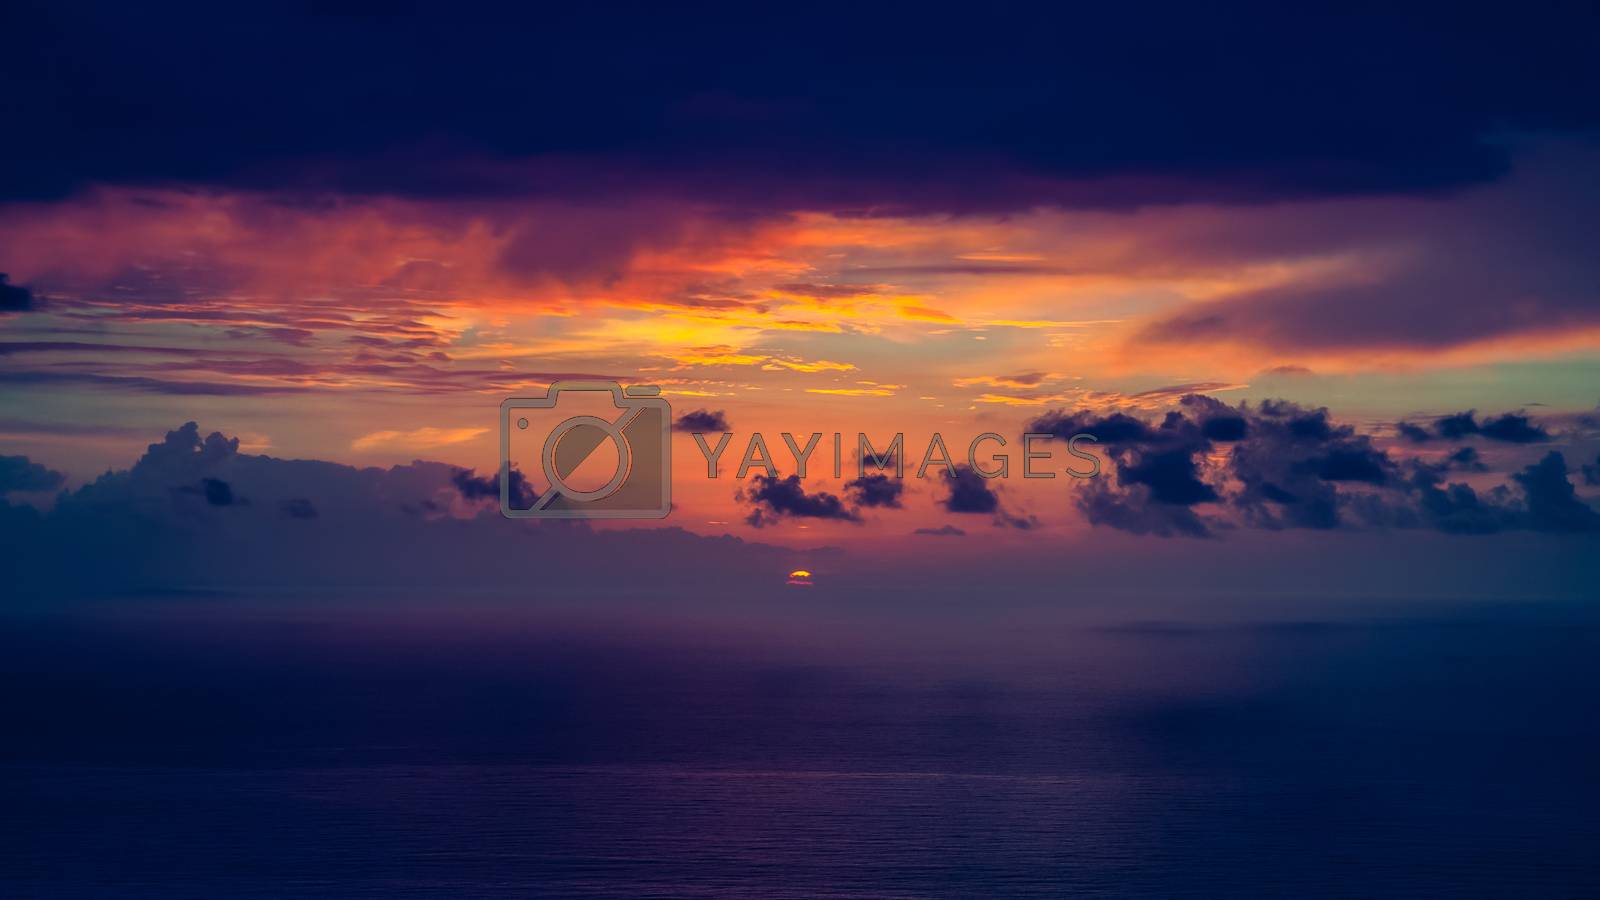 Royalty free image of Dramatic sunset over the sea by Anna_Omelchenko